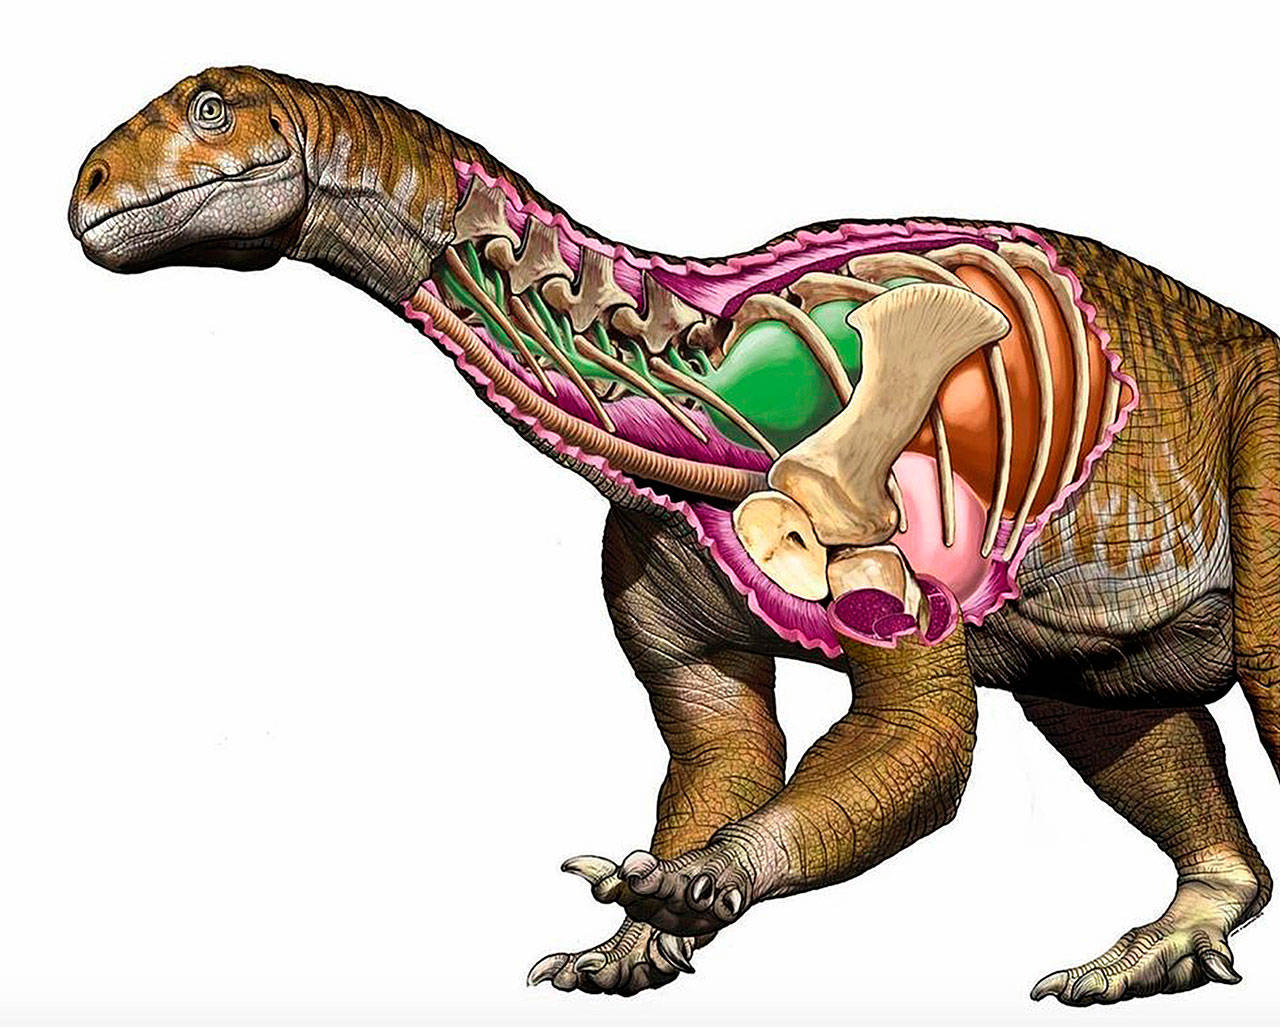 Ingentia prima had an improved, avian-like respiratory system with developed cervical air sacs, shown in green. Its lungs are shown in brown. (Jorge A. Gonzalez)